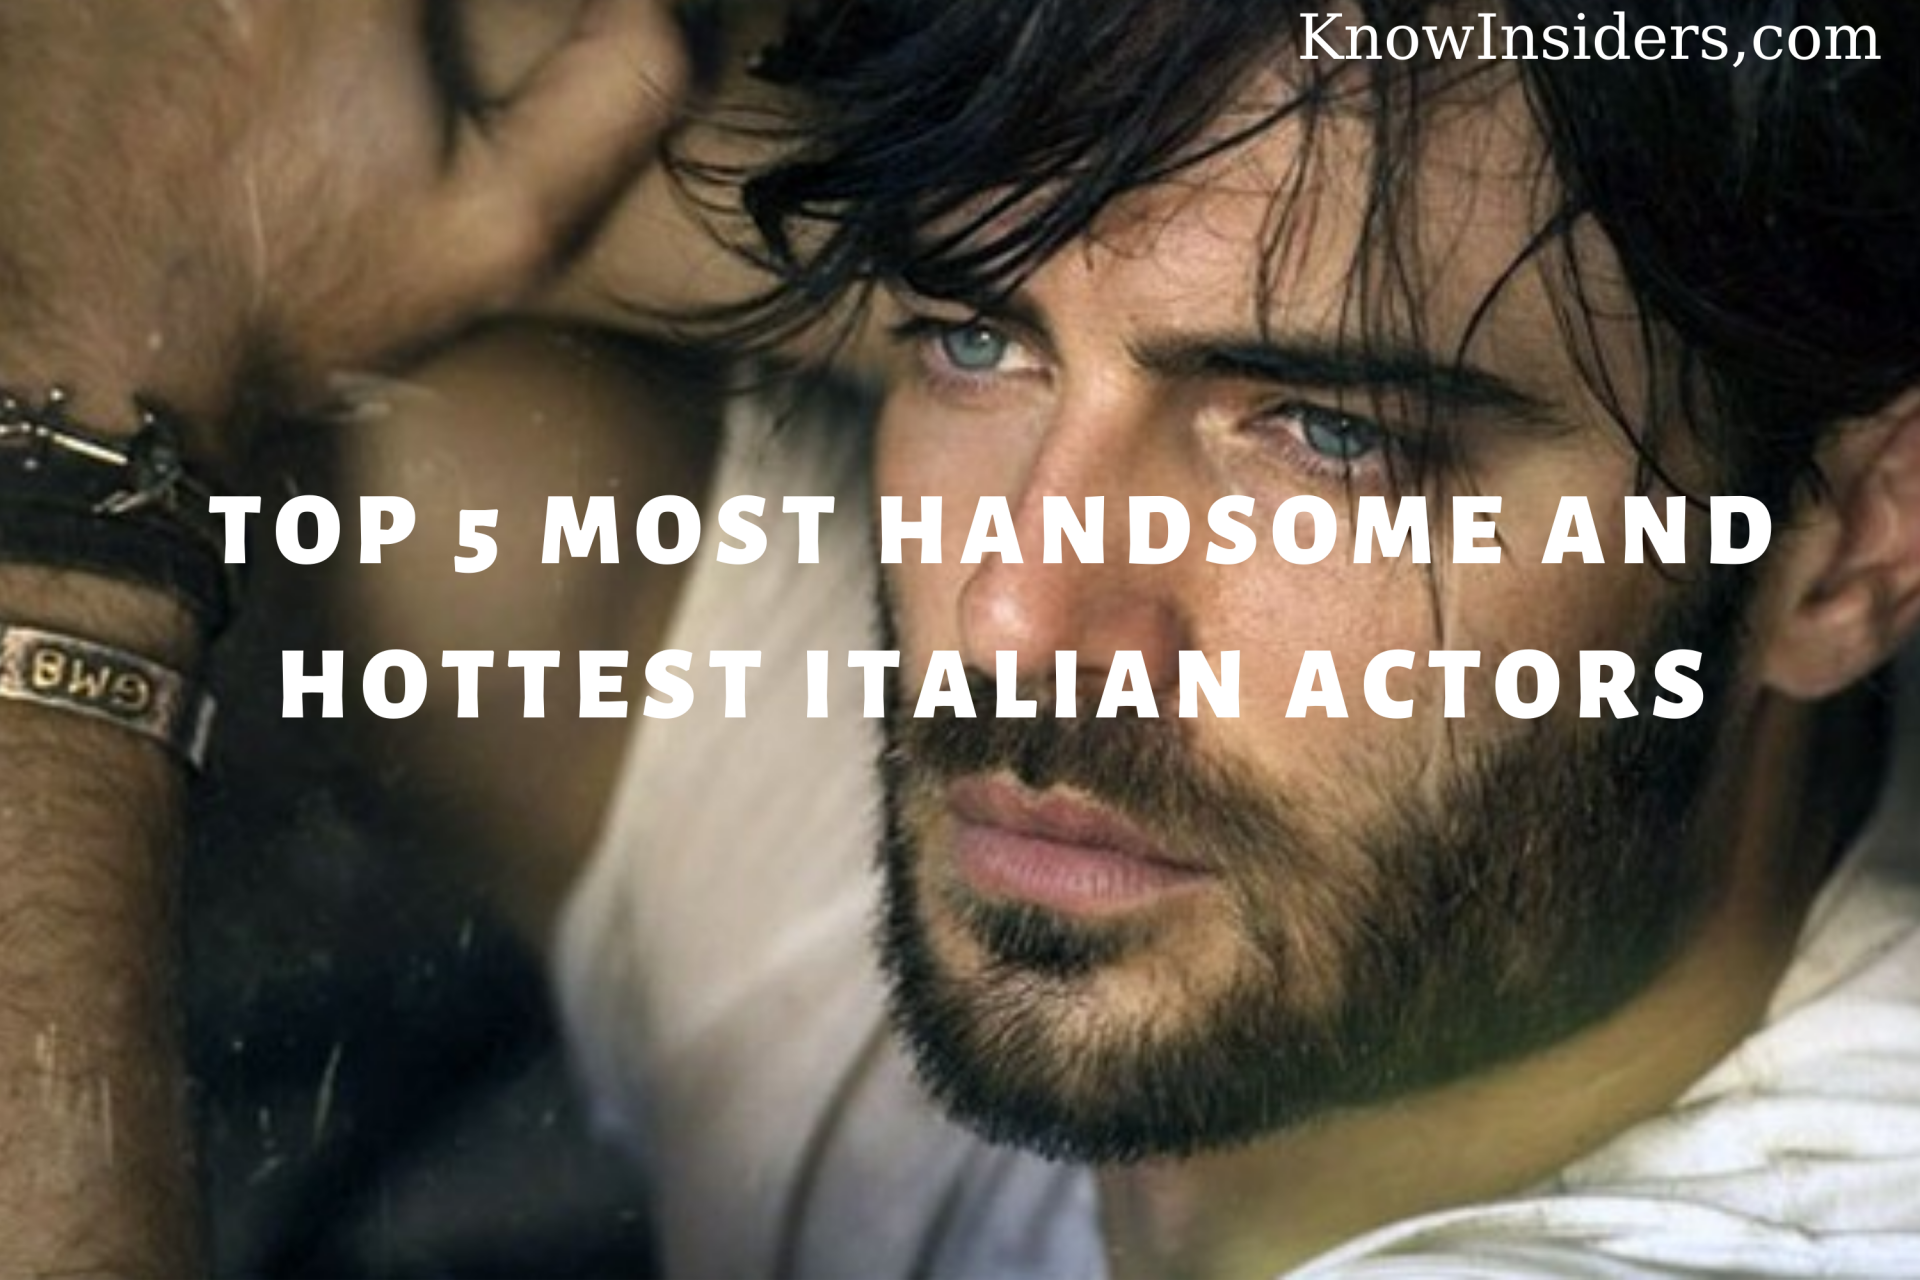 Top 5 Most Handsome and Hottest Italian Actors